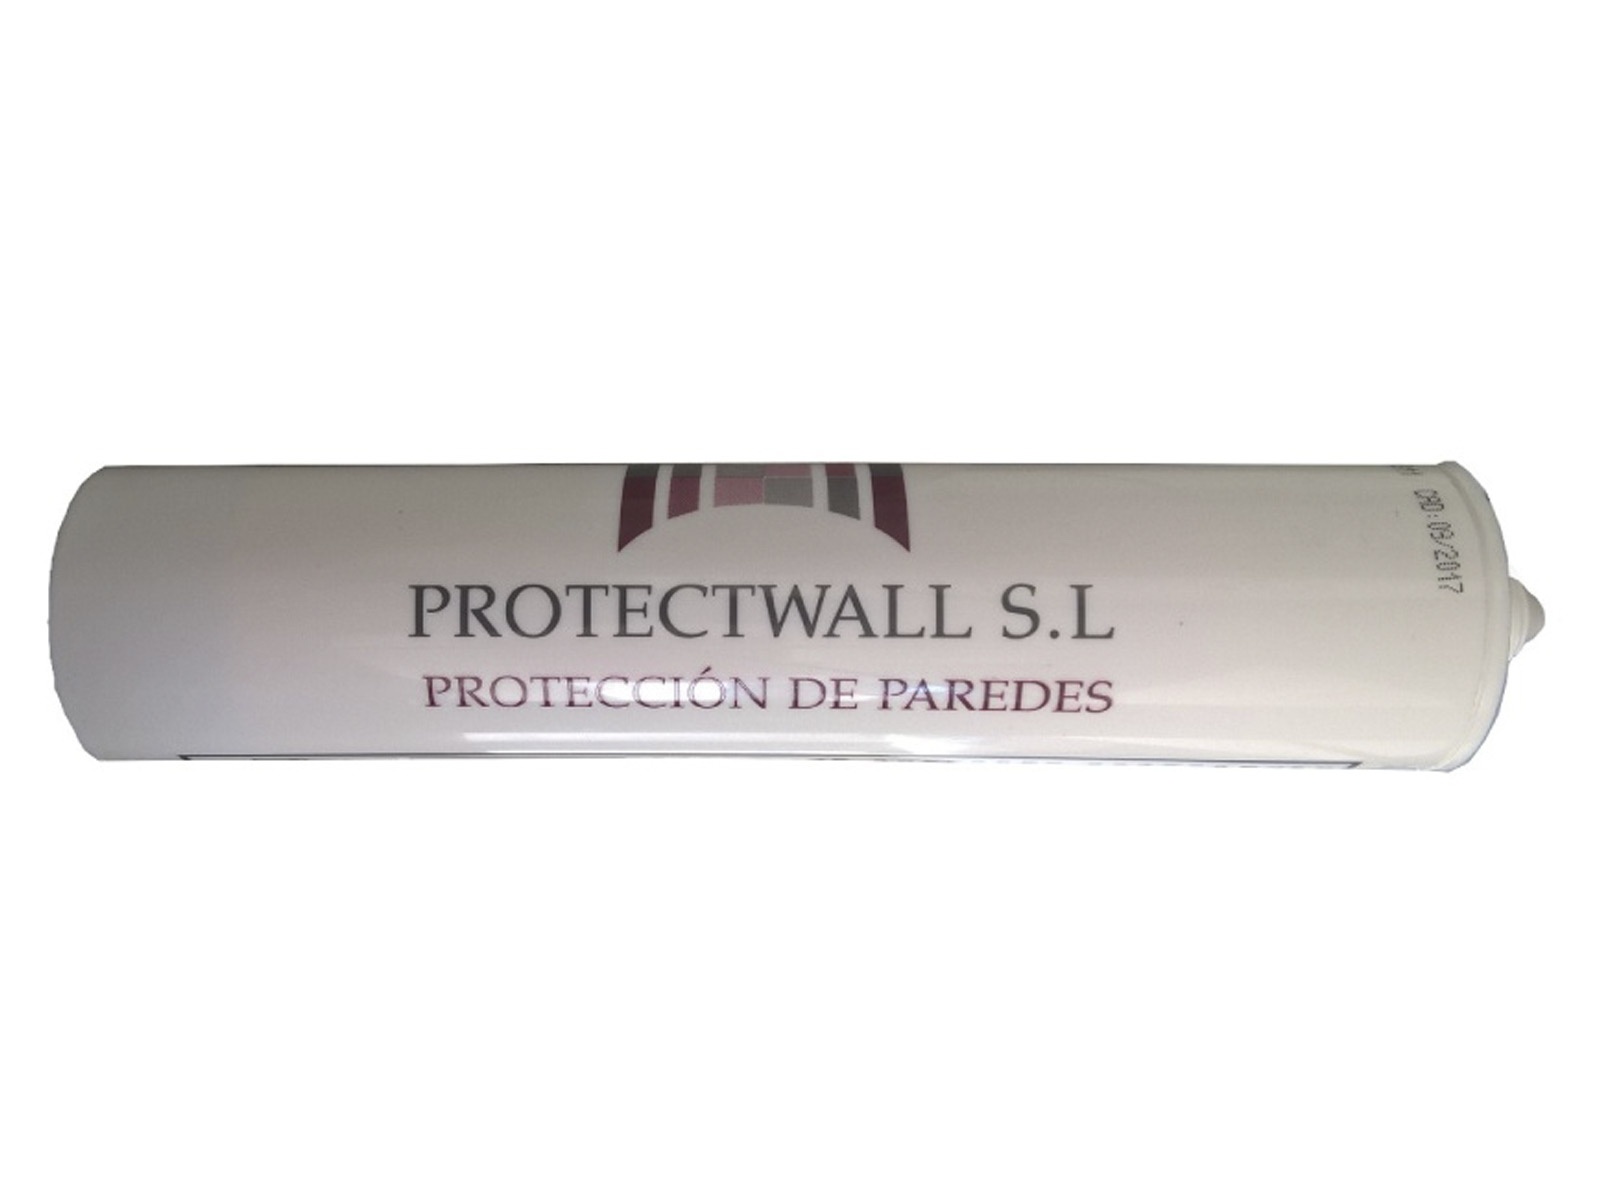  Protectwall Products